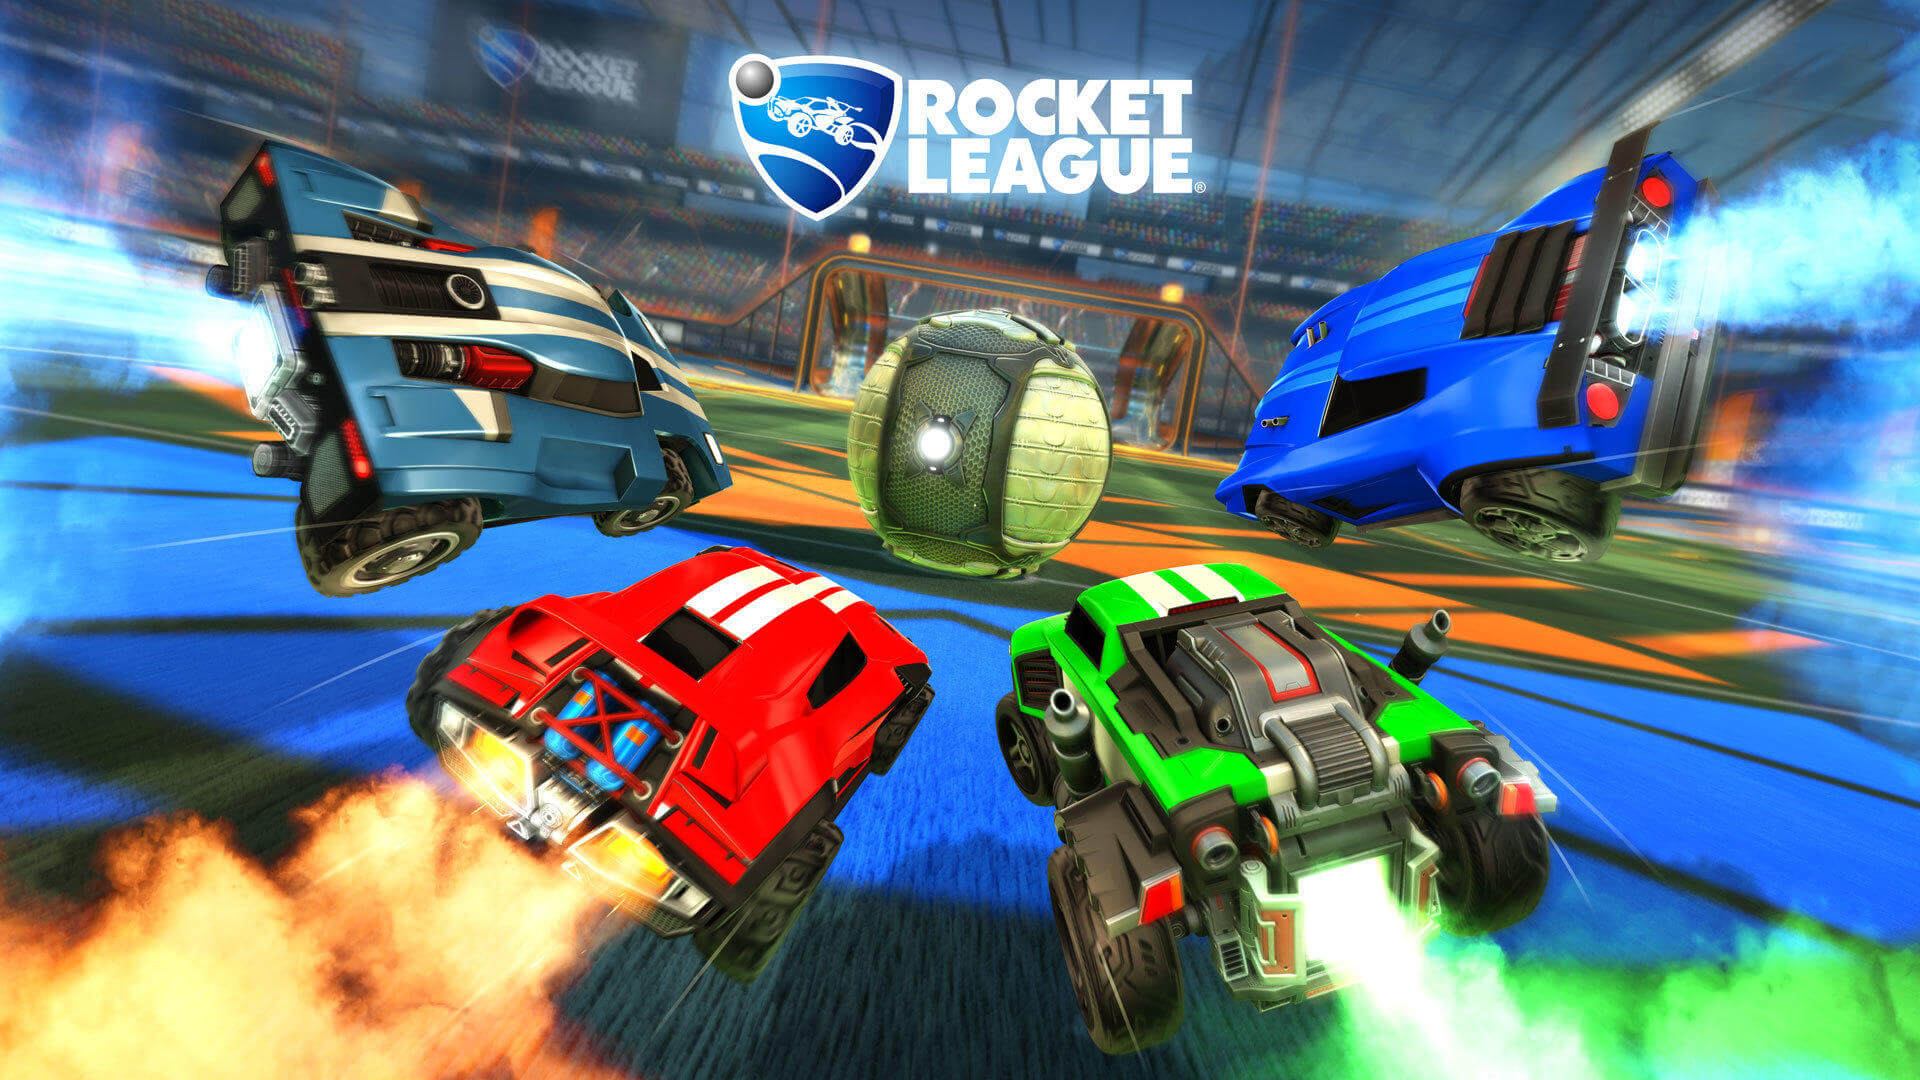 Find Out How to Get Free Credits in Rocket League